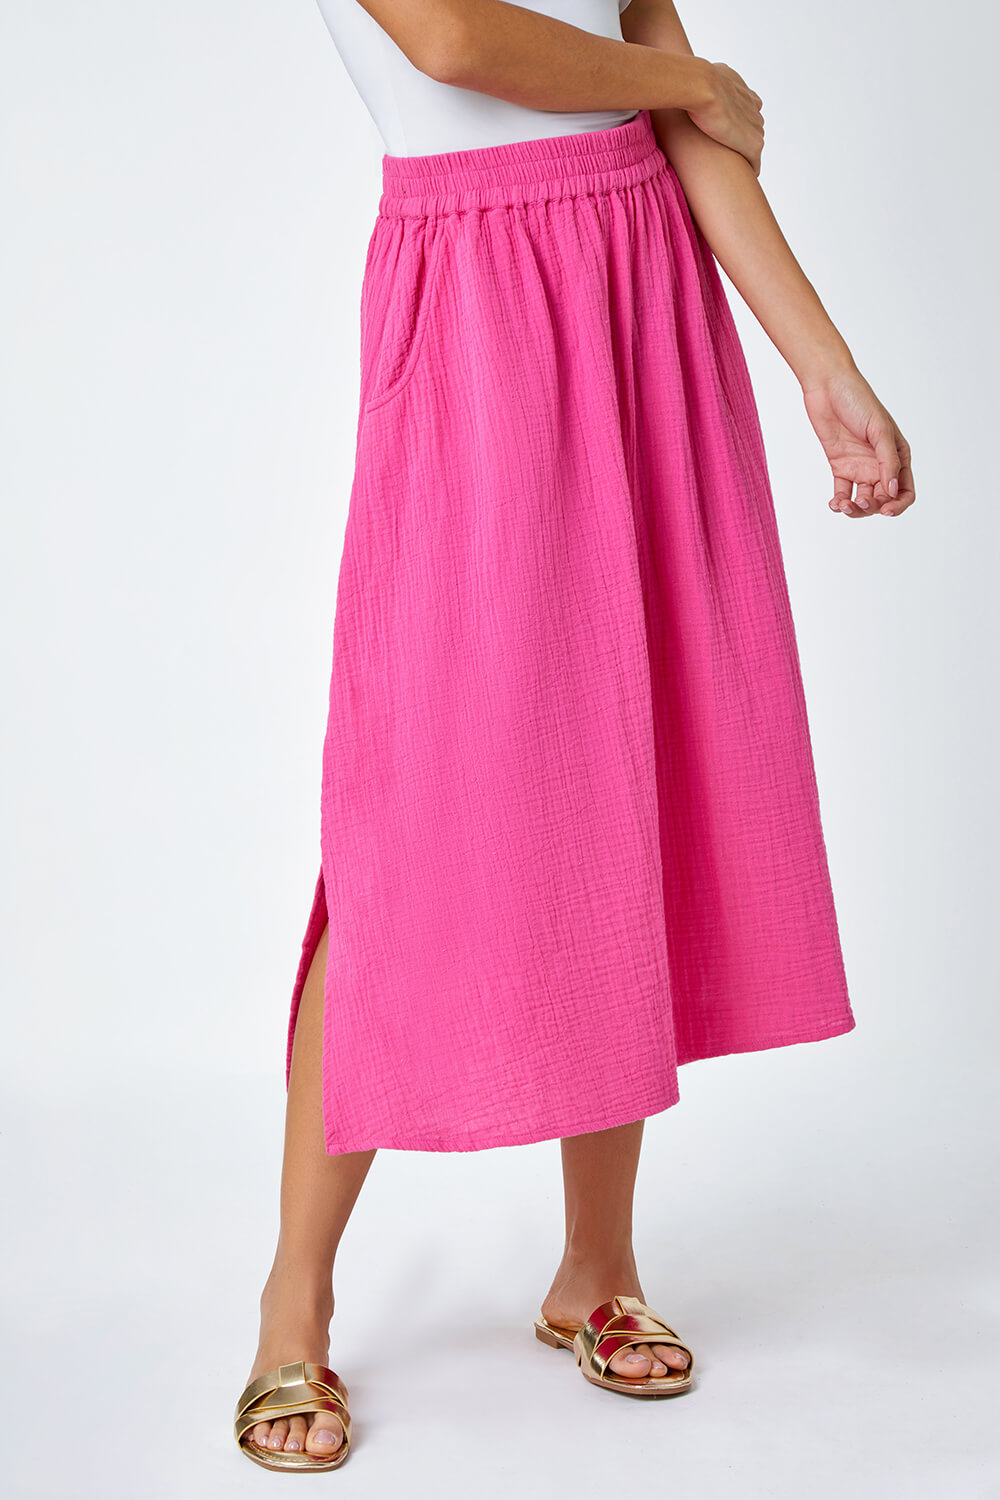 PINK Textured Cotton Maxi Skirt, Image 3 of 4